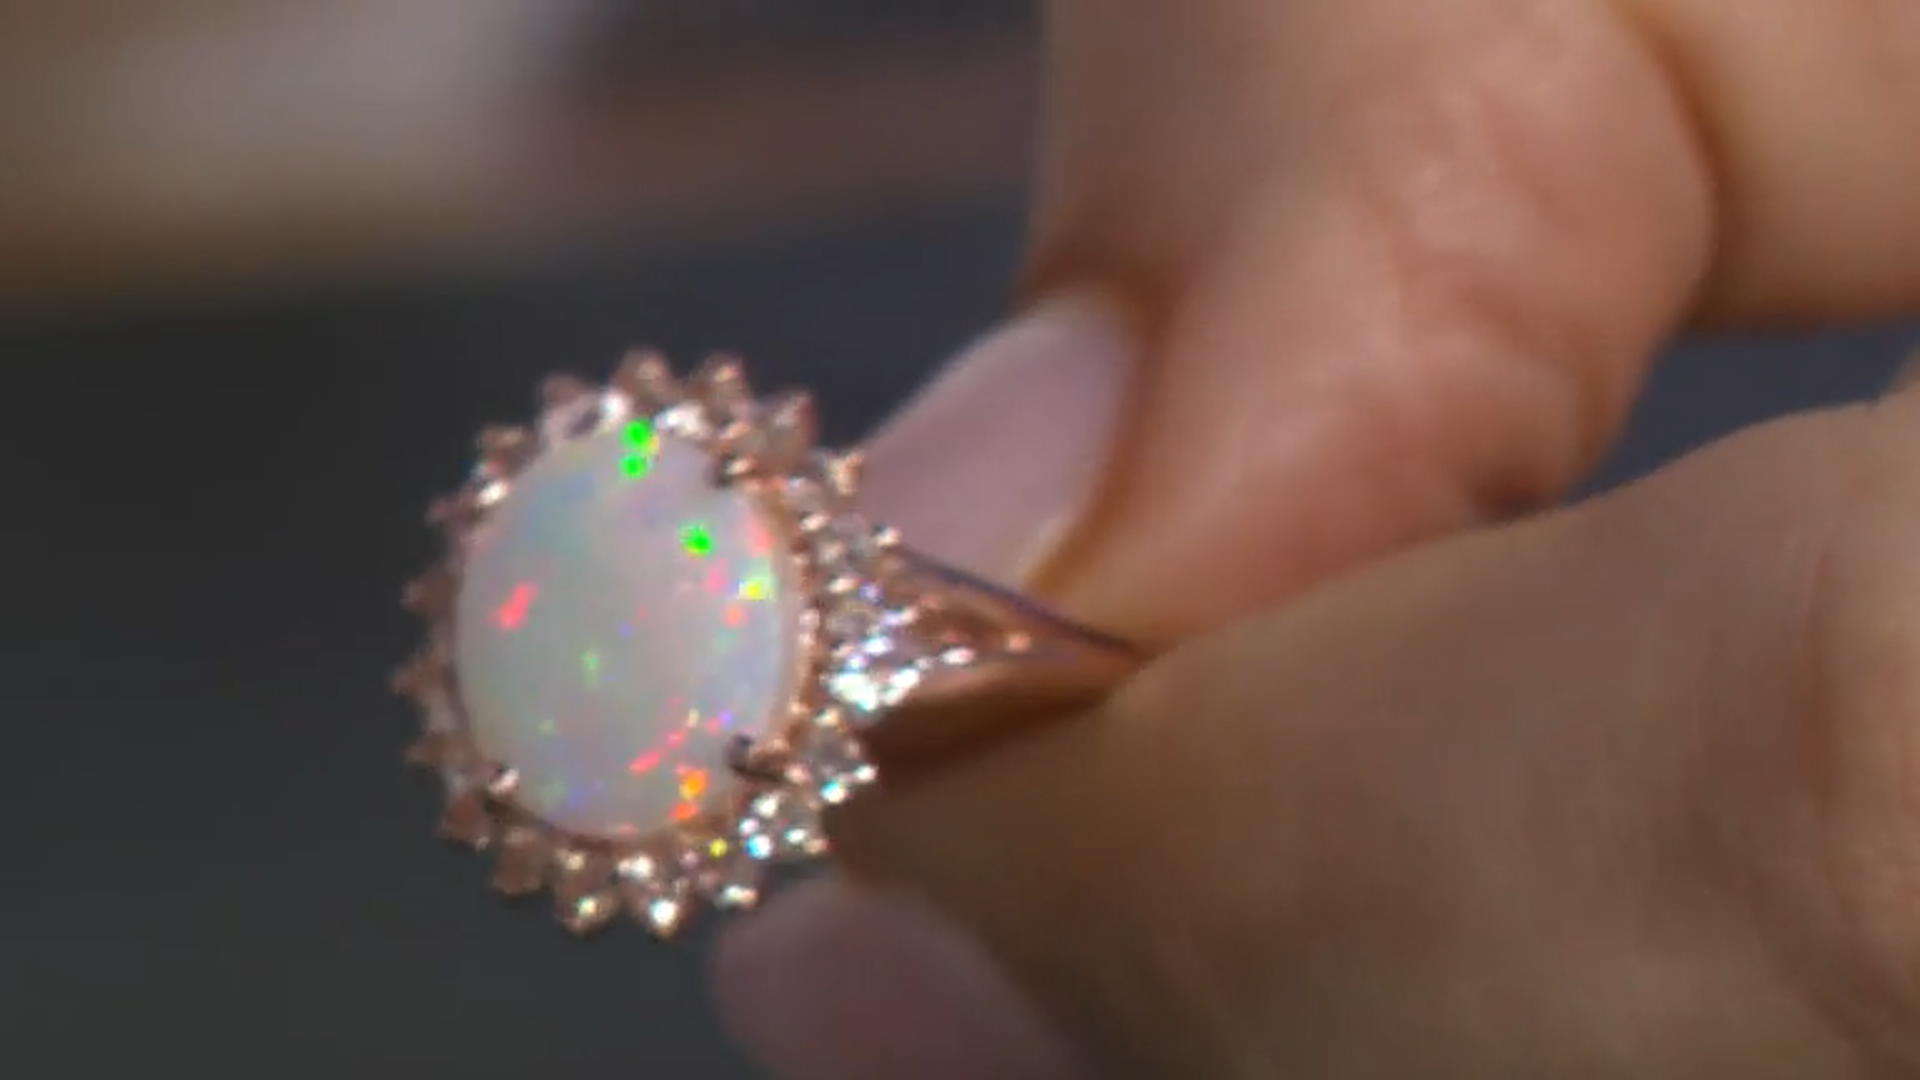 Multi-Color Ethiopian Opal 18k Rose Gold Over Sterling Silver Halo Ring 2.89ctw Video Thumbnail